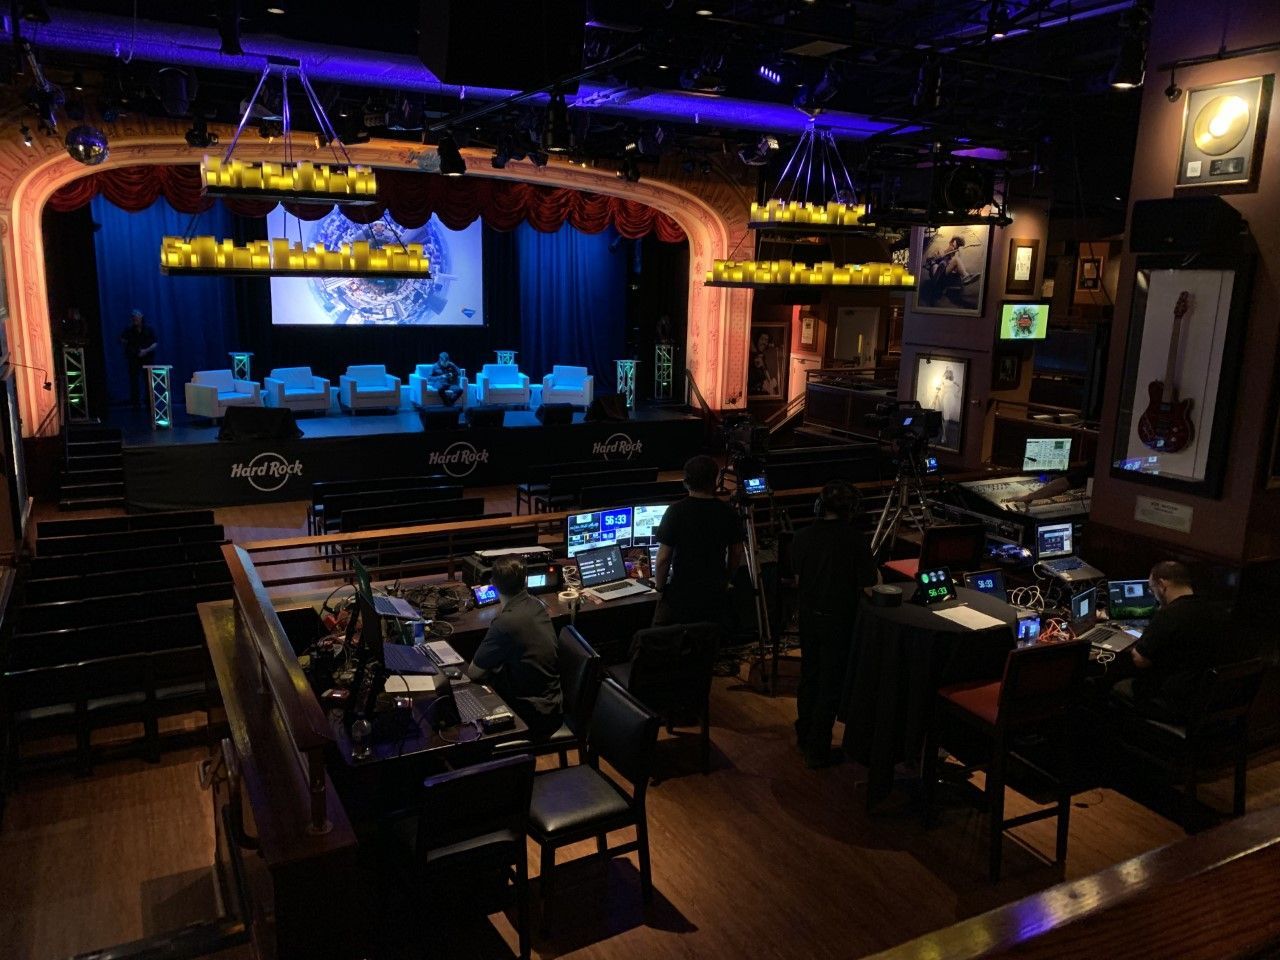 Live event production by Stratosphere in NYC in Hard Rock restaurant